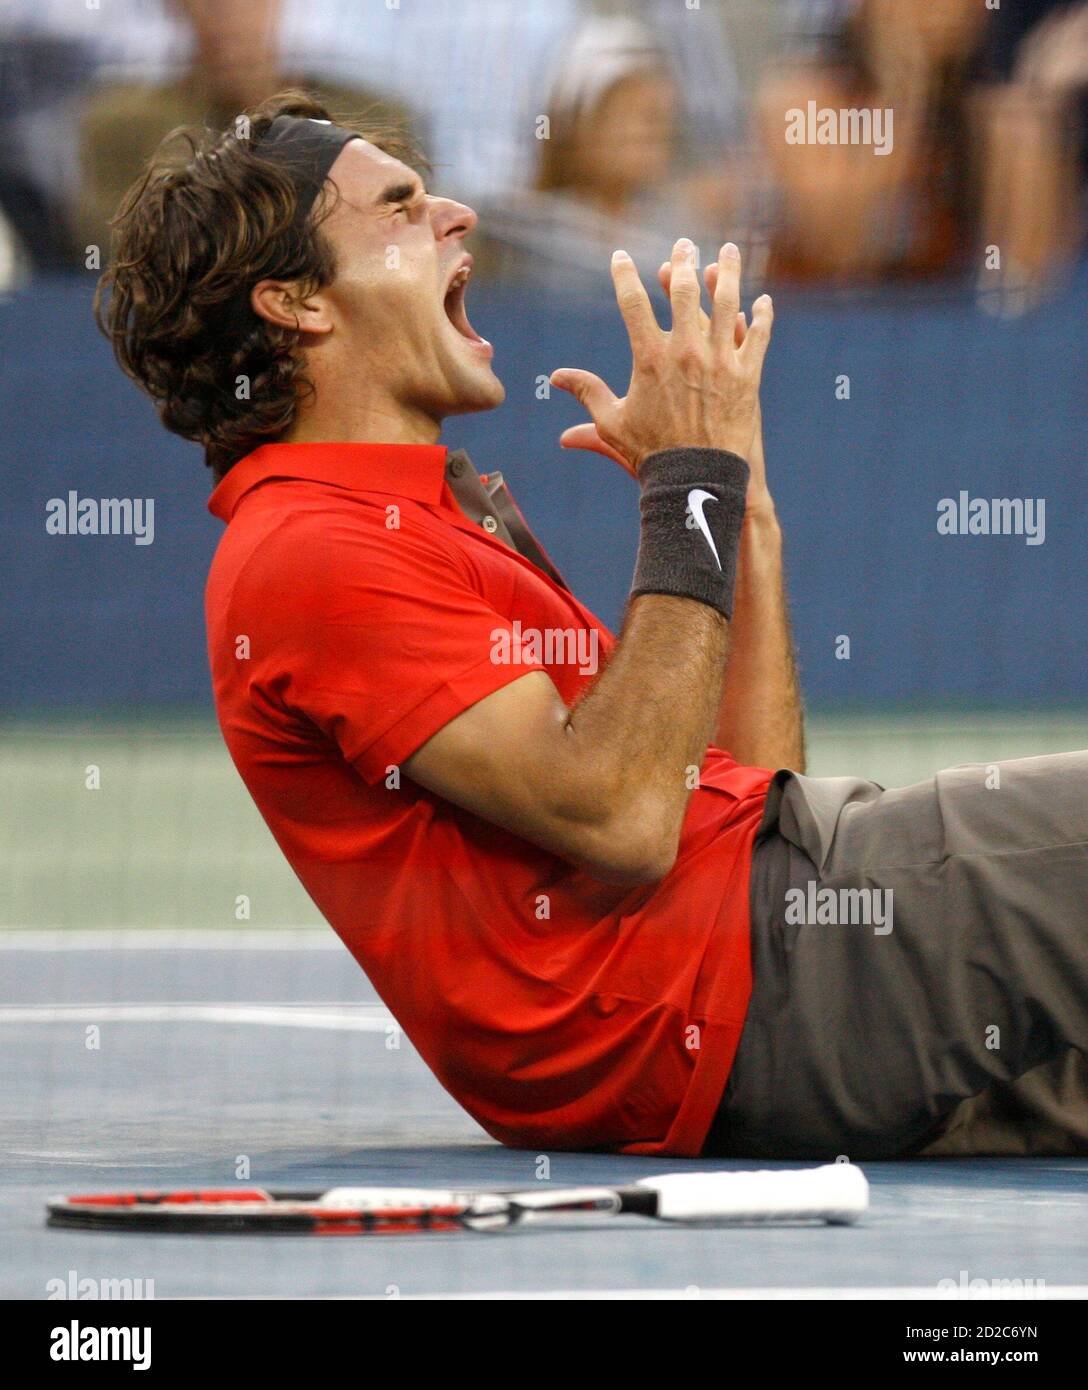 Roger Federer of Switzerland celebrates match point beating Andy Murray of  Britain for his fifth straight U.S. Open title during the men's final match  at the U.S. Open tennis tournament at Flushing